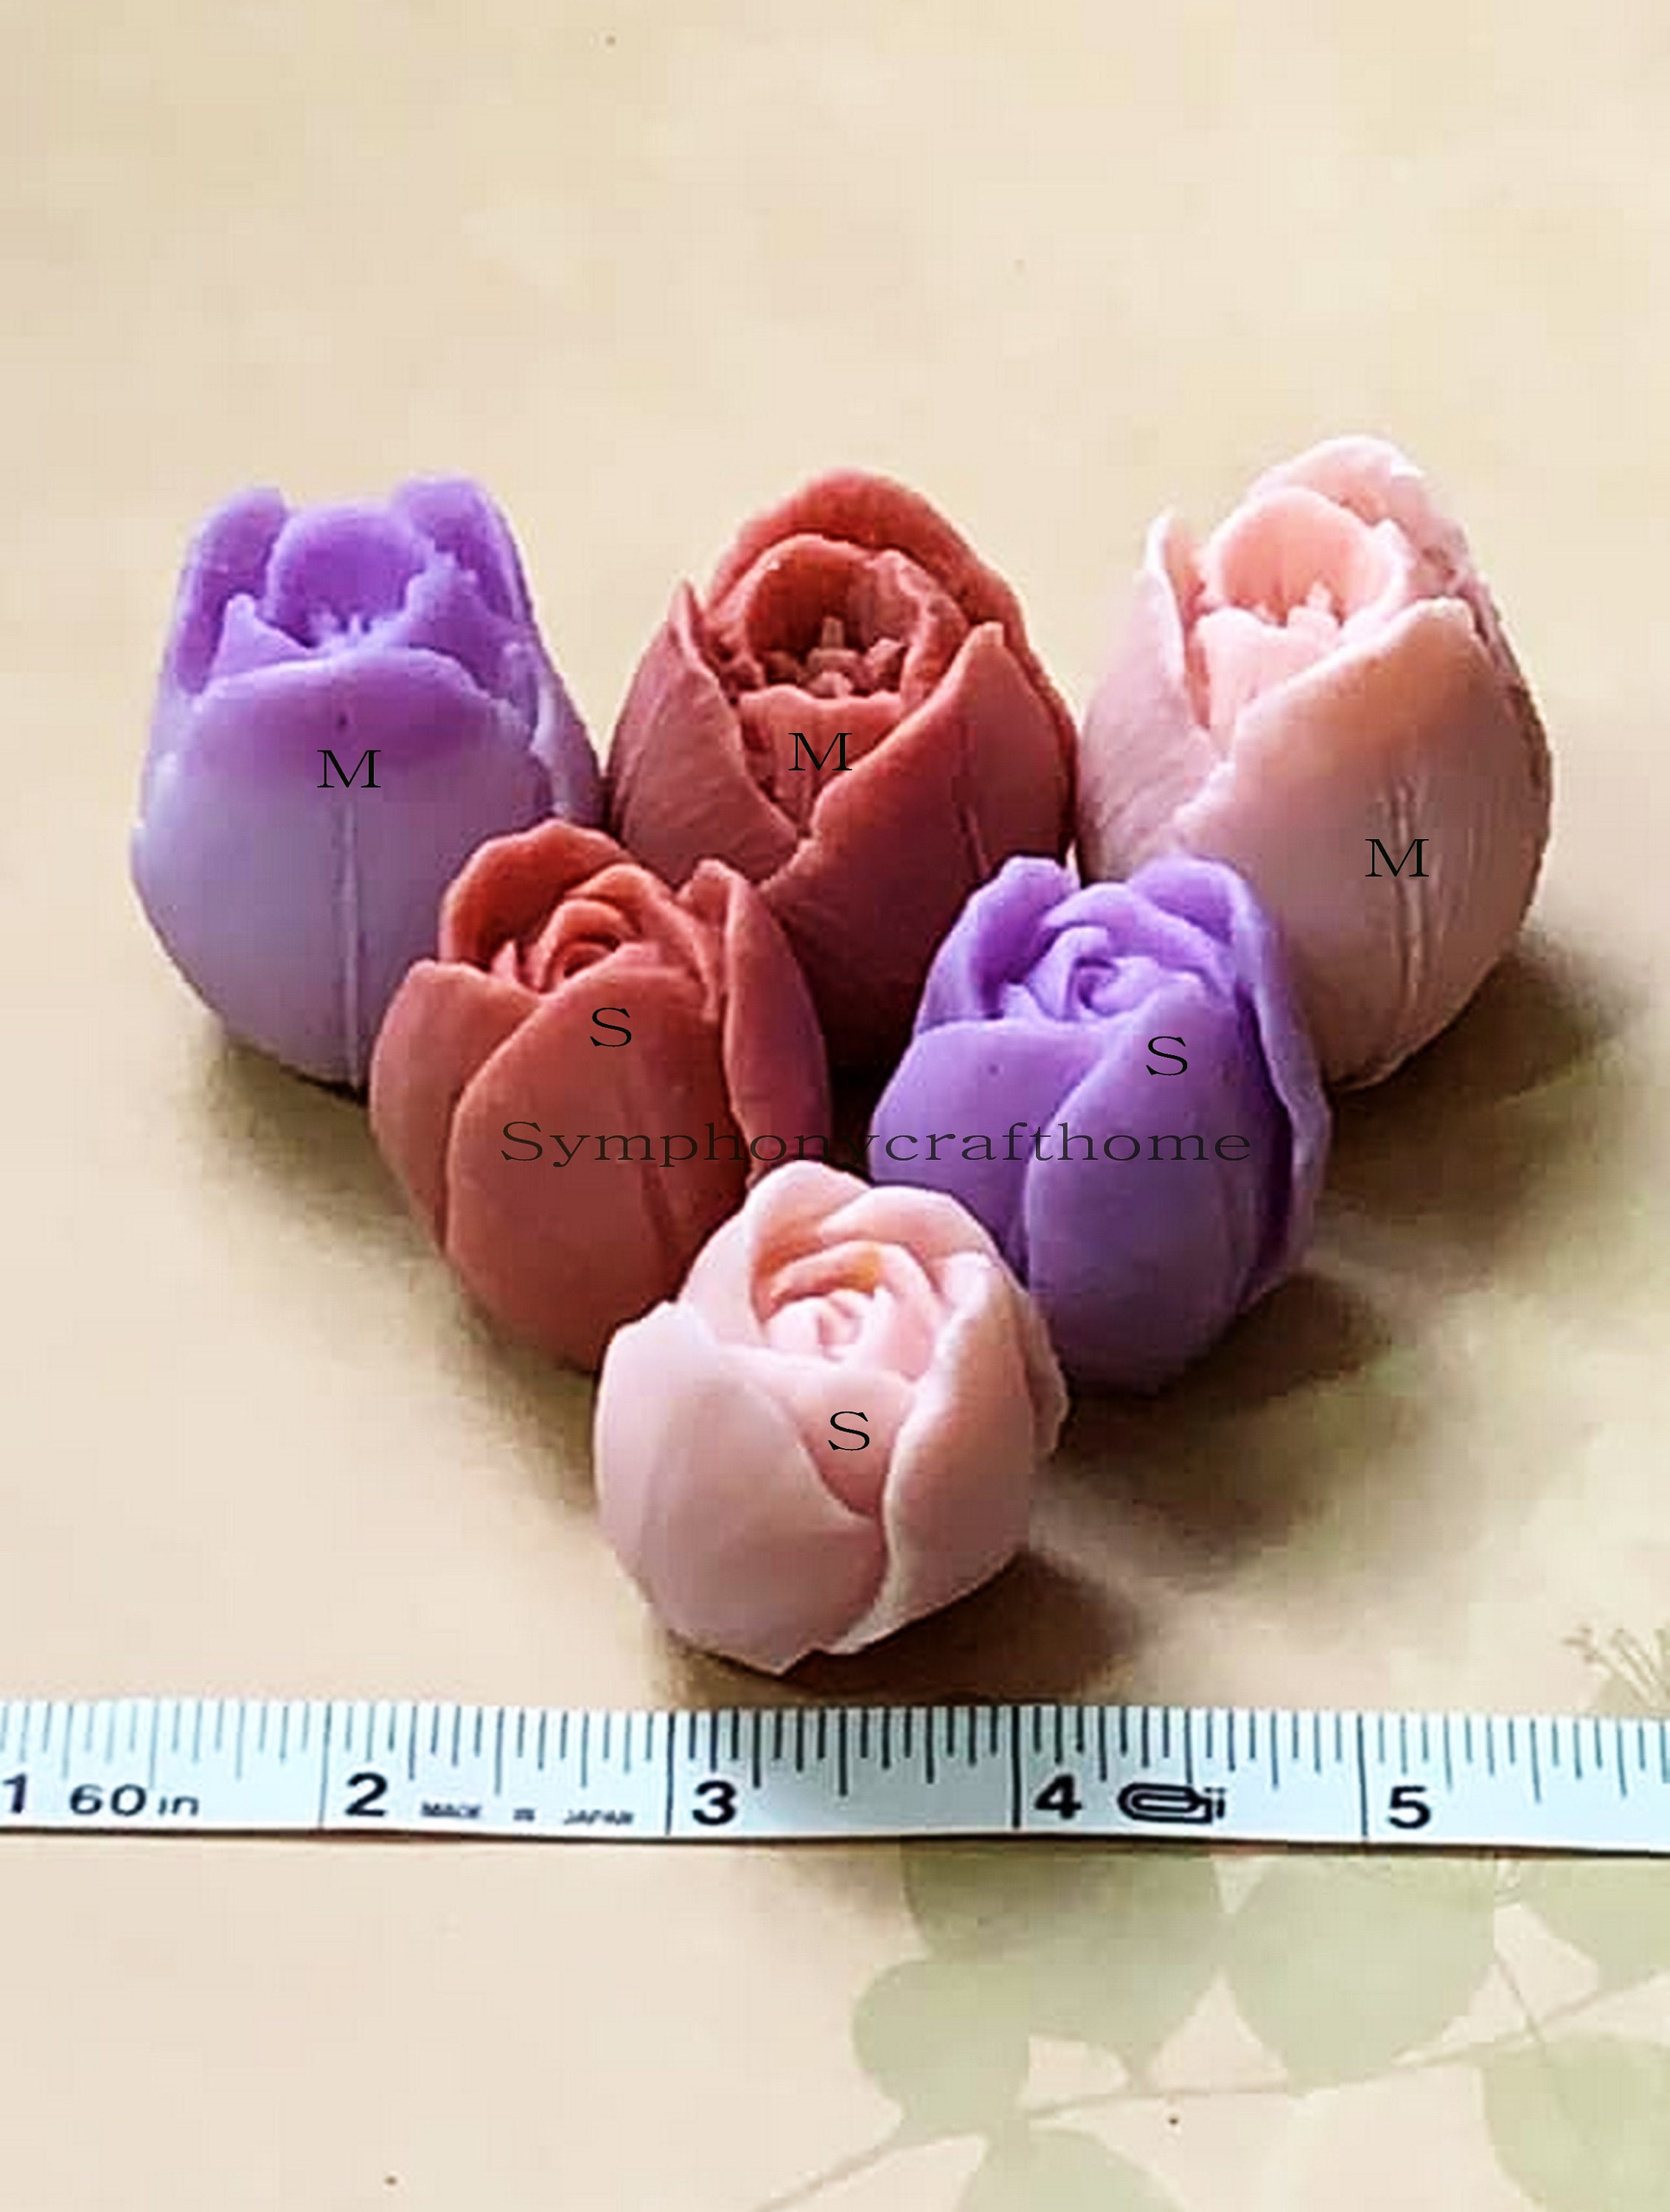 3D Silicone Candle Molds for Candle Making Flower Resin Molds for